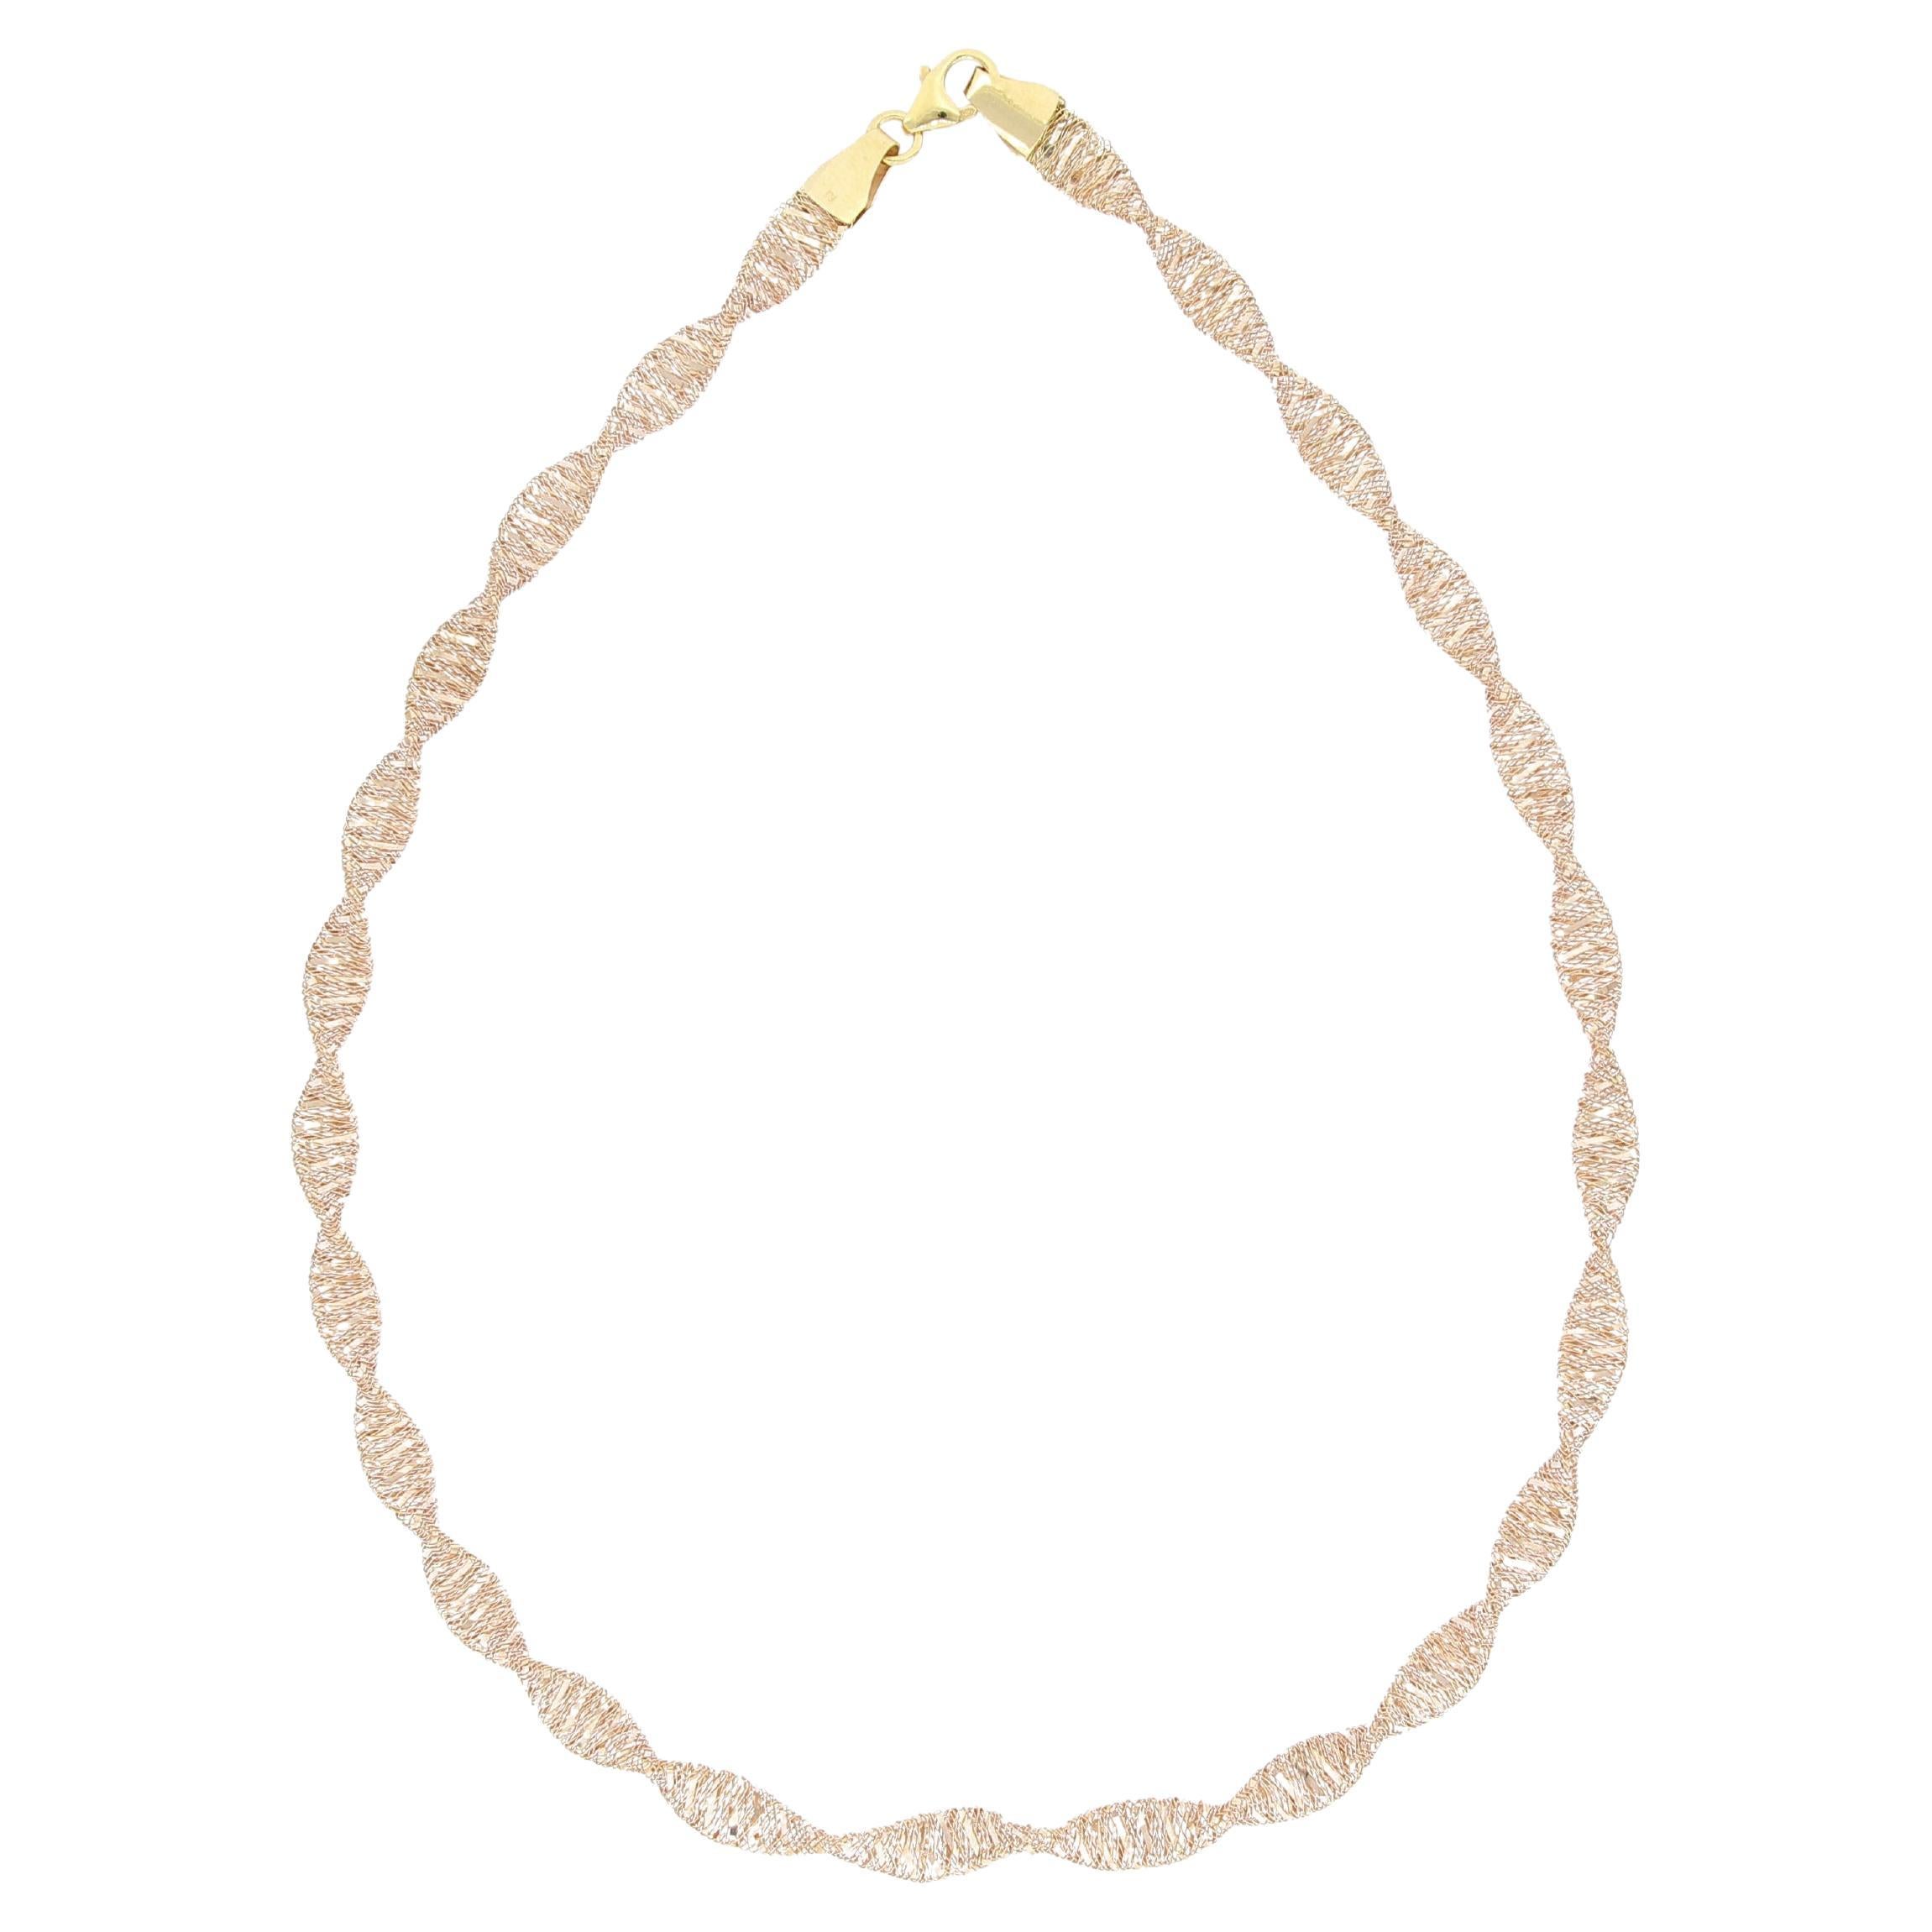 Italian 18K Rose Gold Necklace with Twisted Design